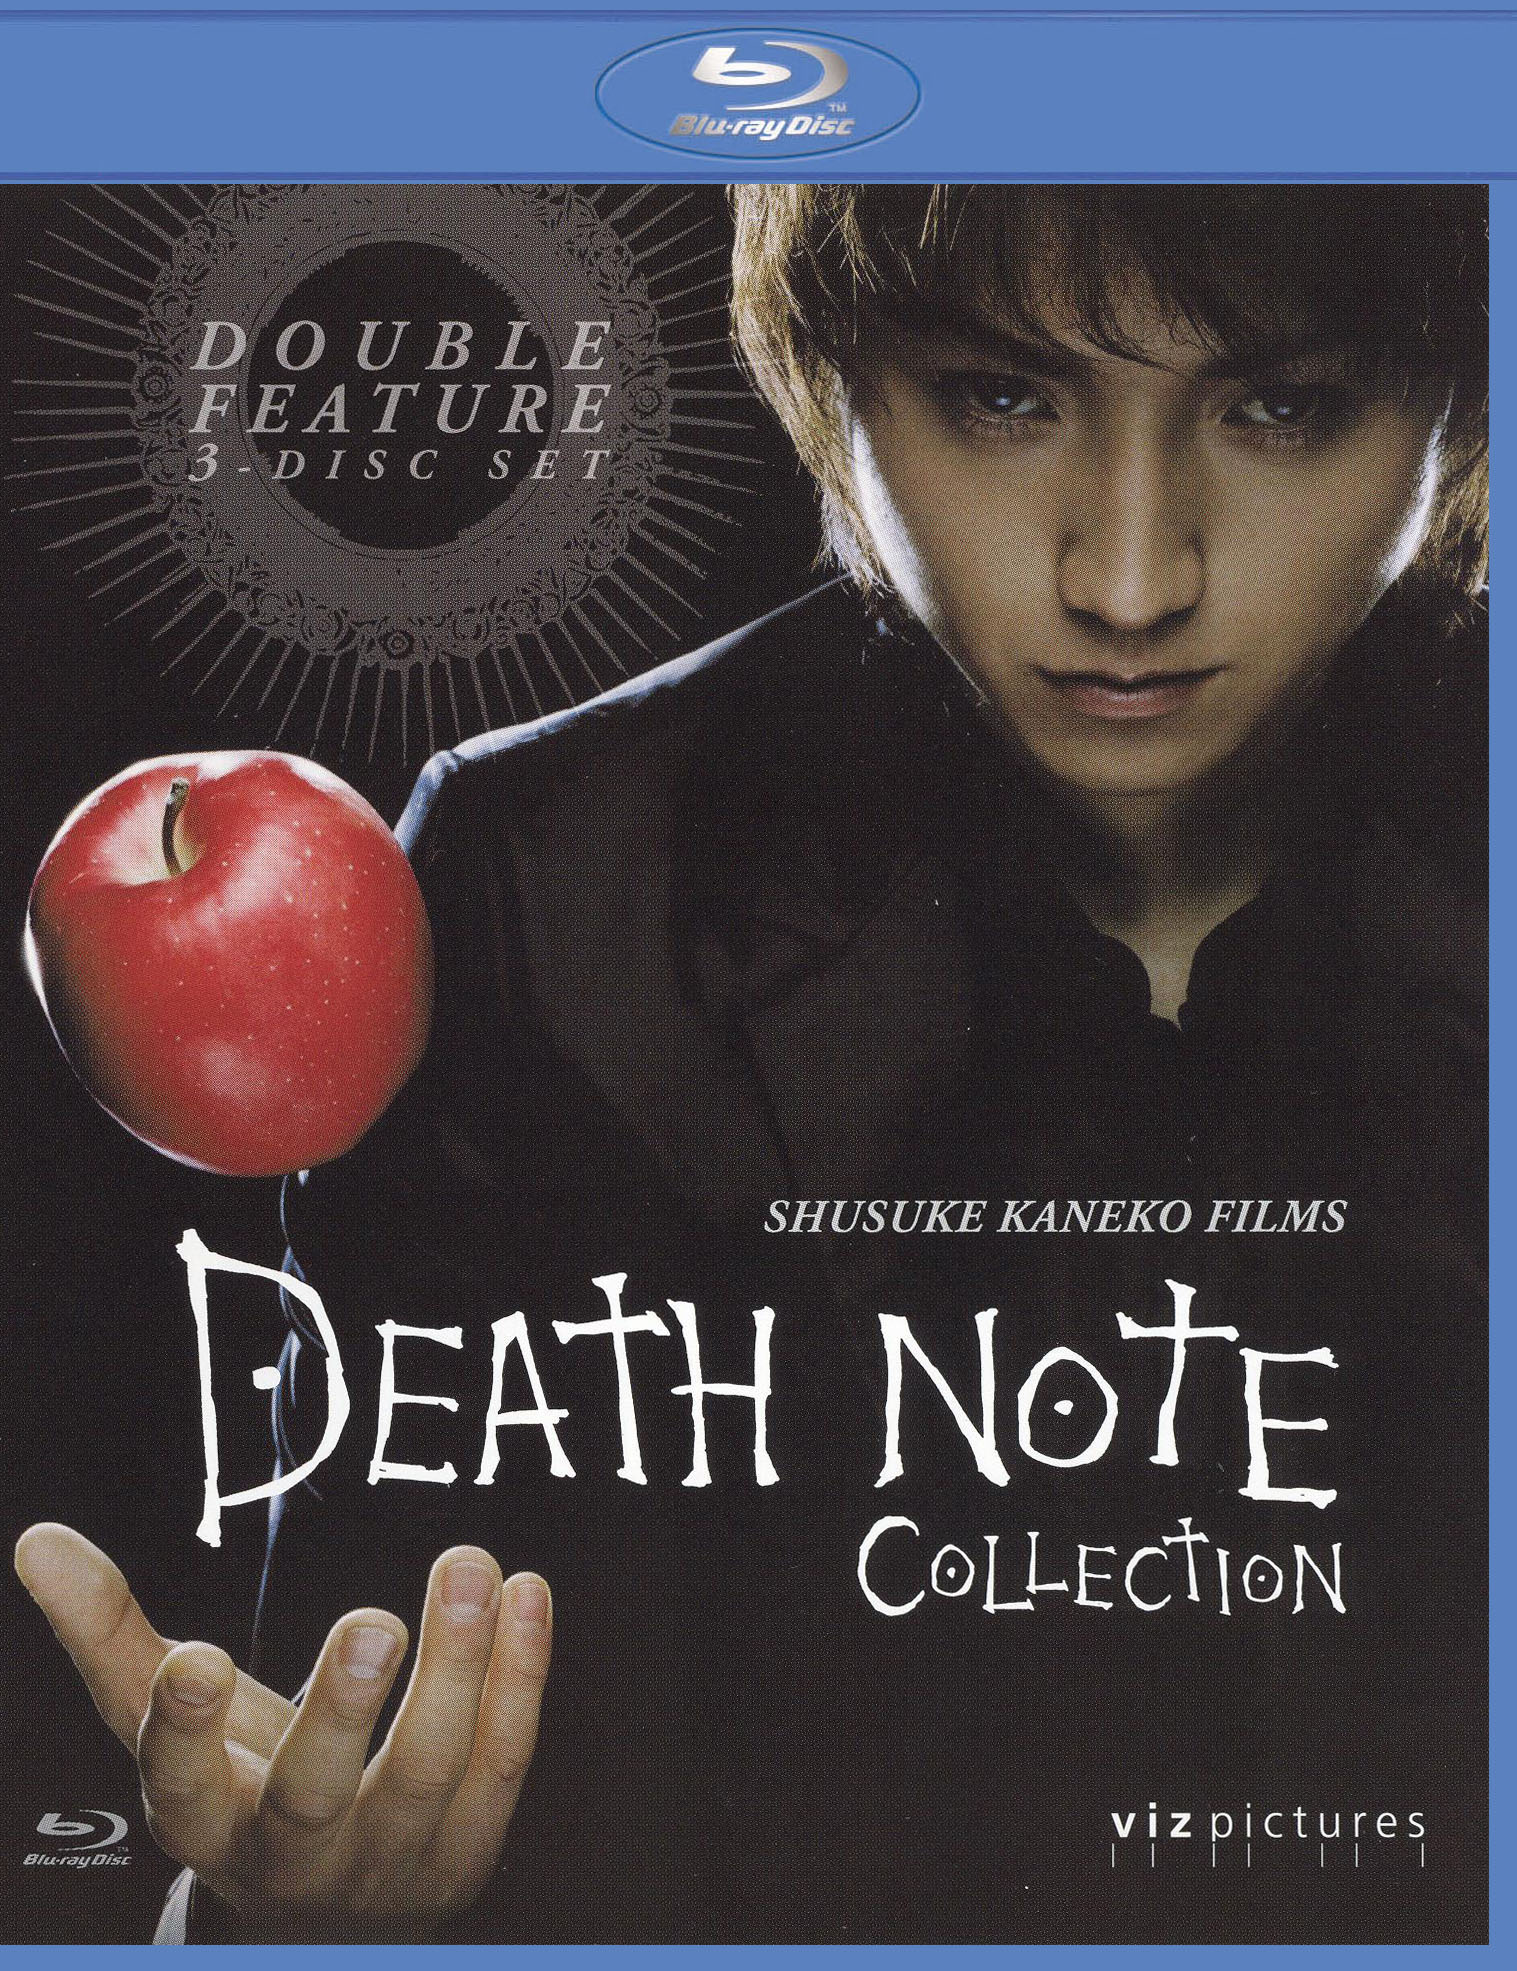 Today I got Death Note The Complete Series at Walmart PR for $15 : r/Bluray